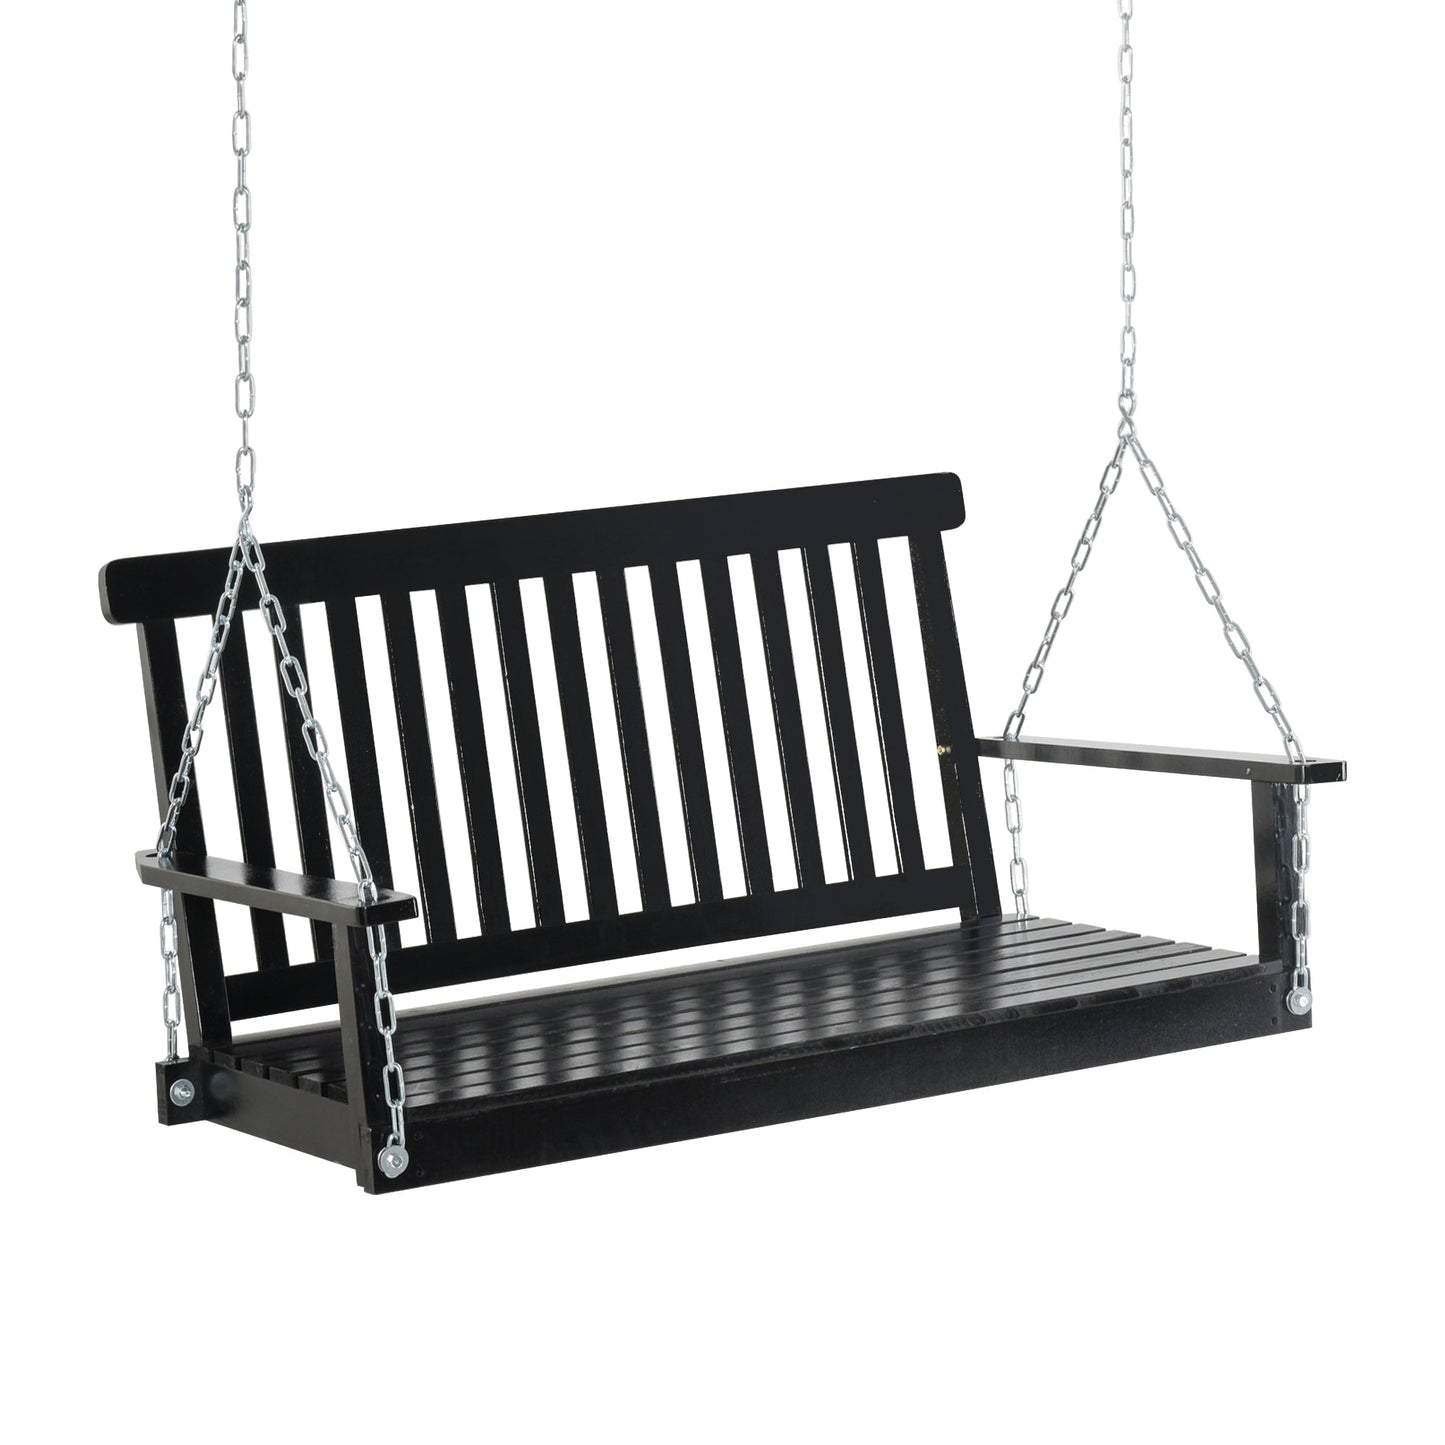 Outdoor and Garden-2-Seater Hanging Porch Swing Outdoor Patio Swing Chair Seat with Slatted Build and Chains, 440lbs Weight Capacity, Black - Outdoor Style Company